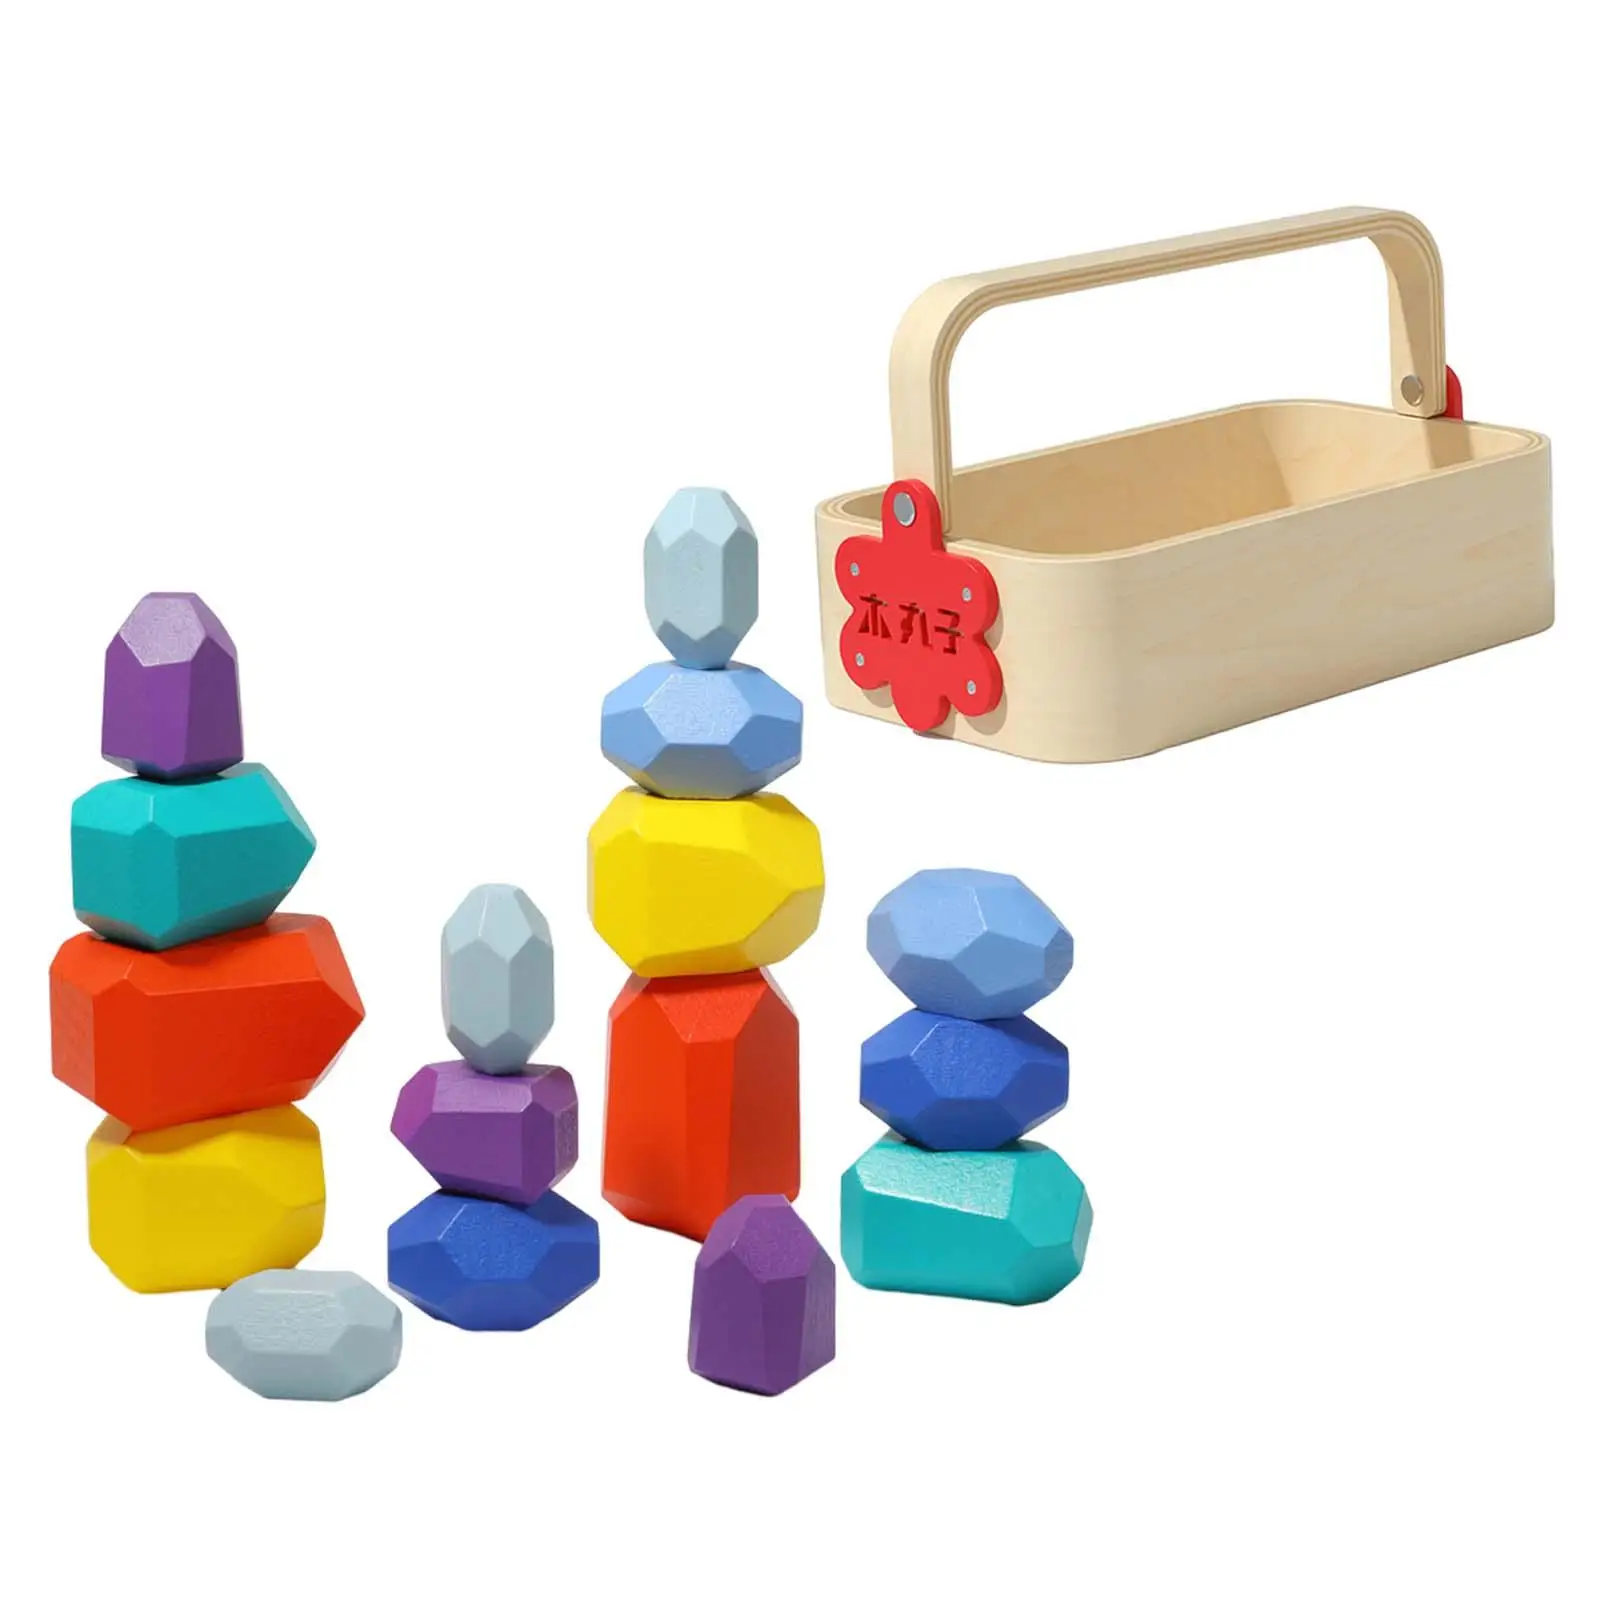 Stacking Blocks Early Learning with Basket Sensory Toys Montessori Wood for Kid 3 Years up Children Boys Girls Birthday Gifts